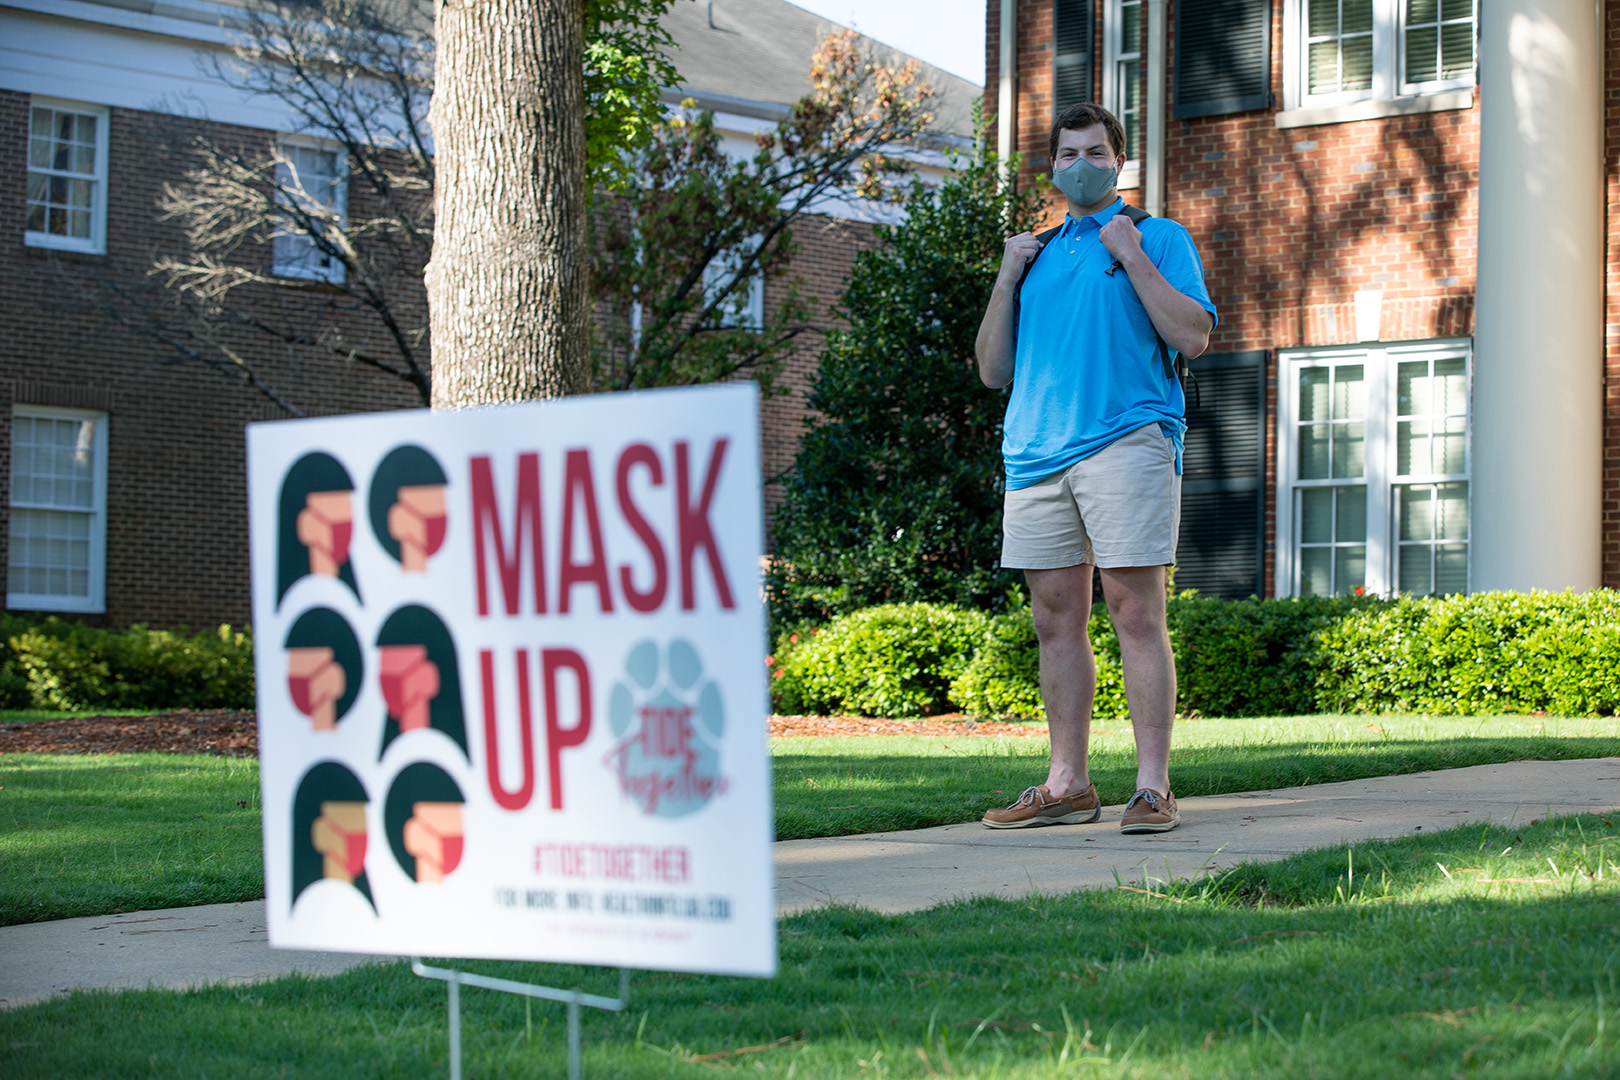 A UA student stands behind a mask sign on campus.